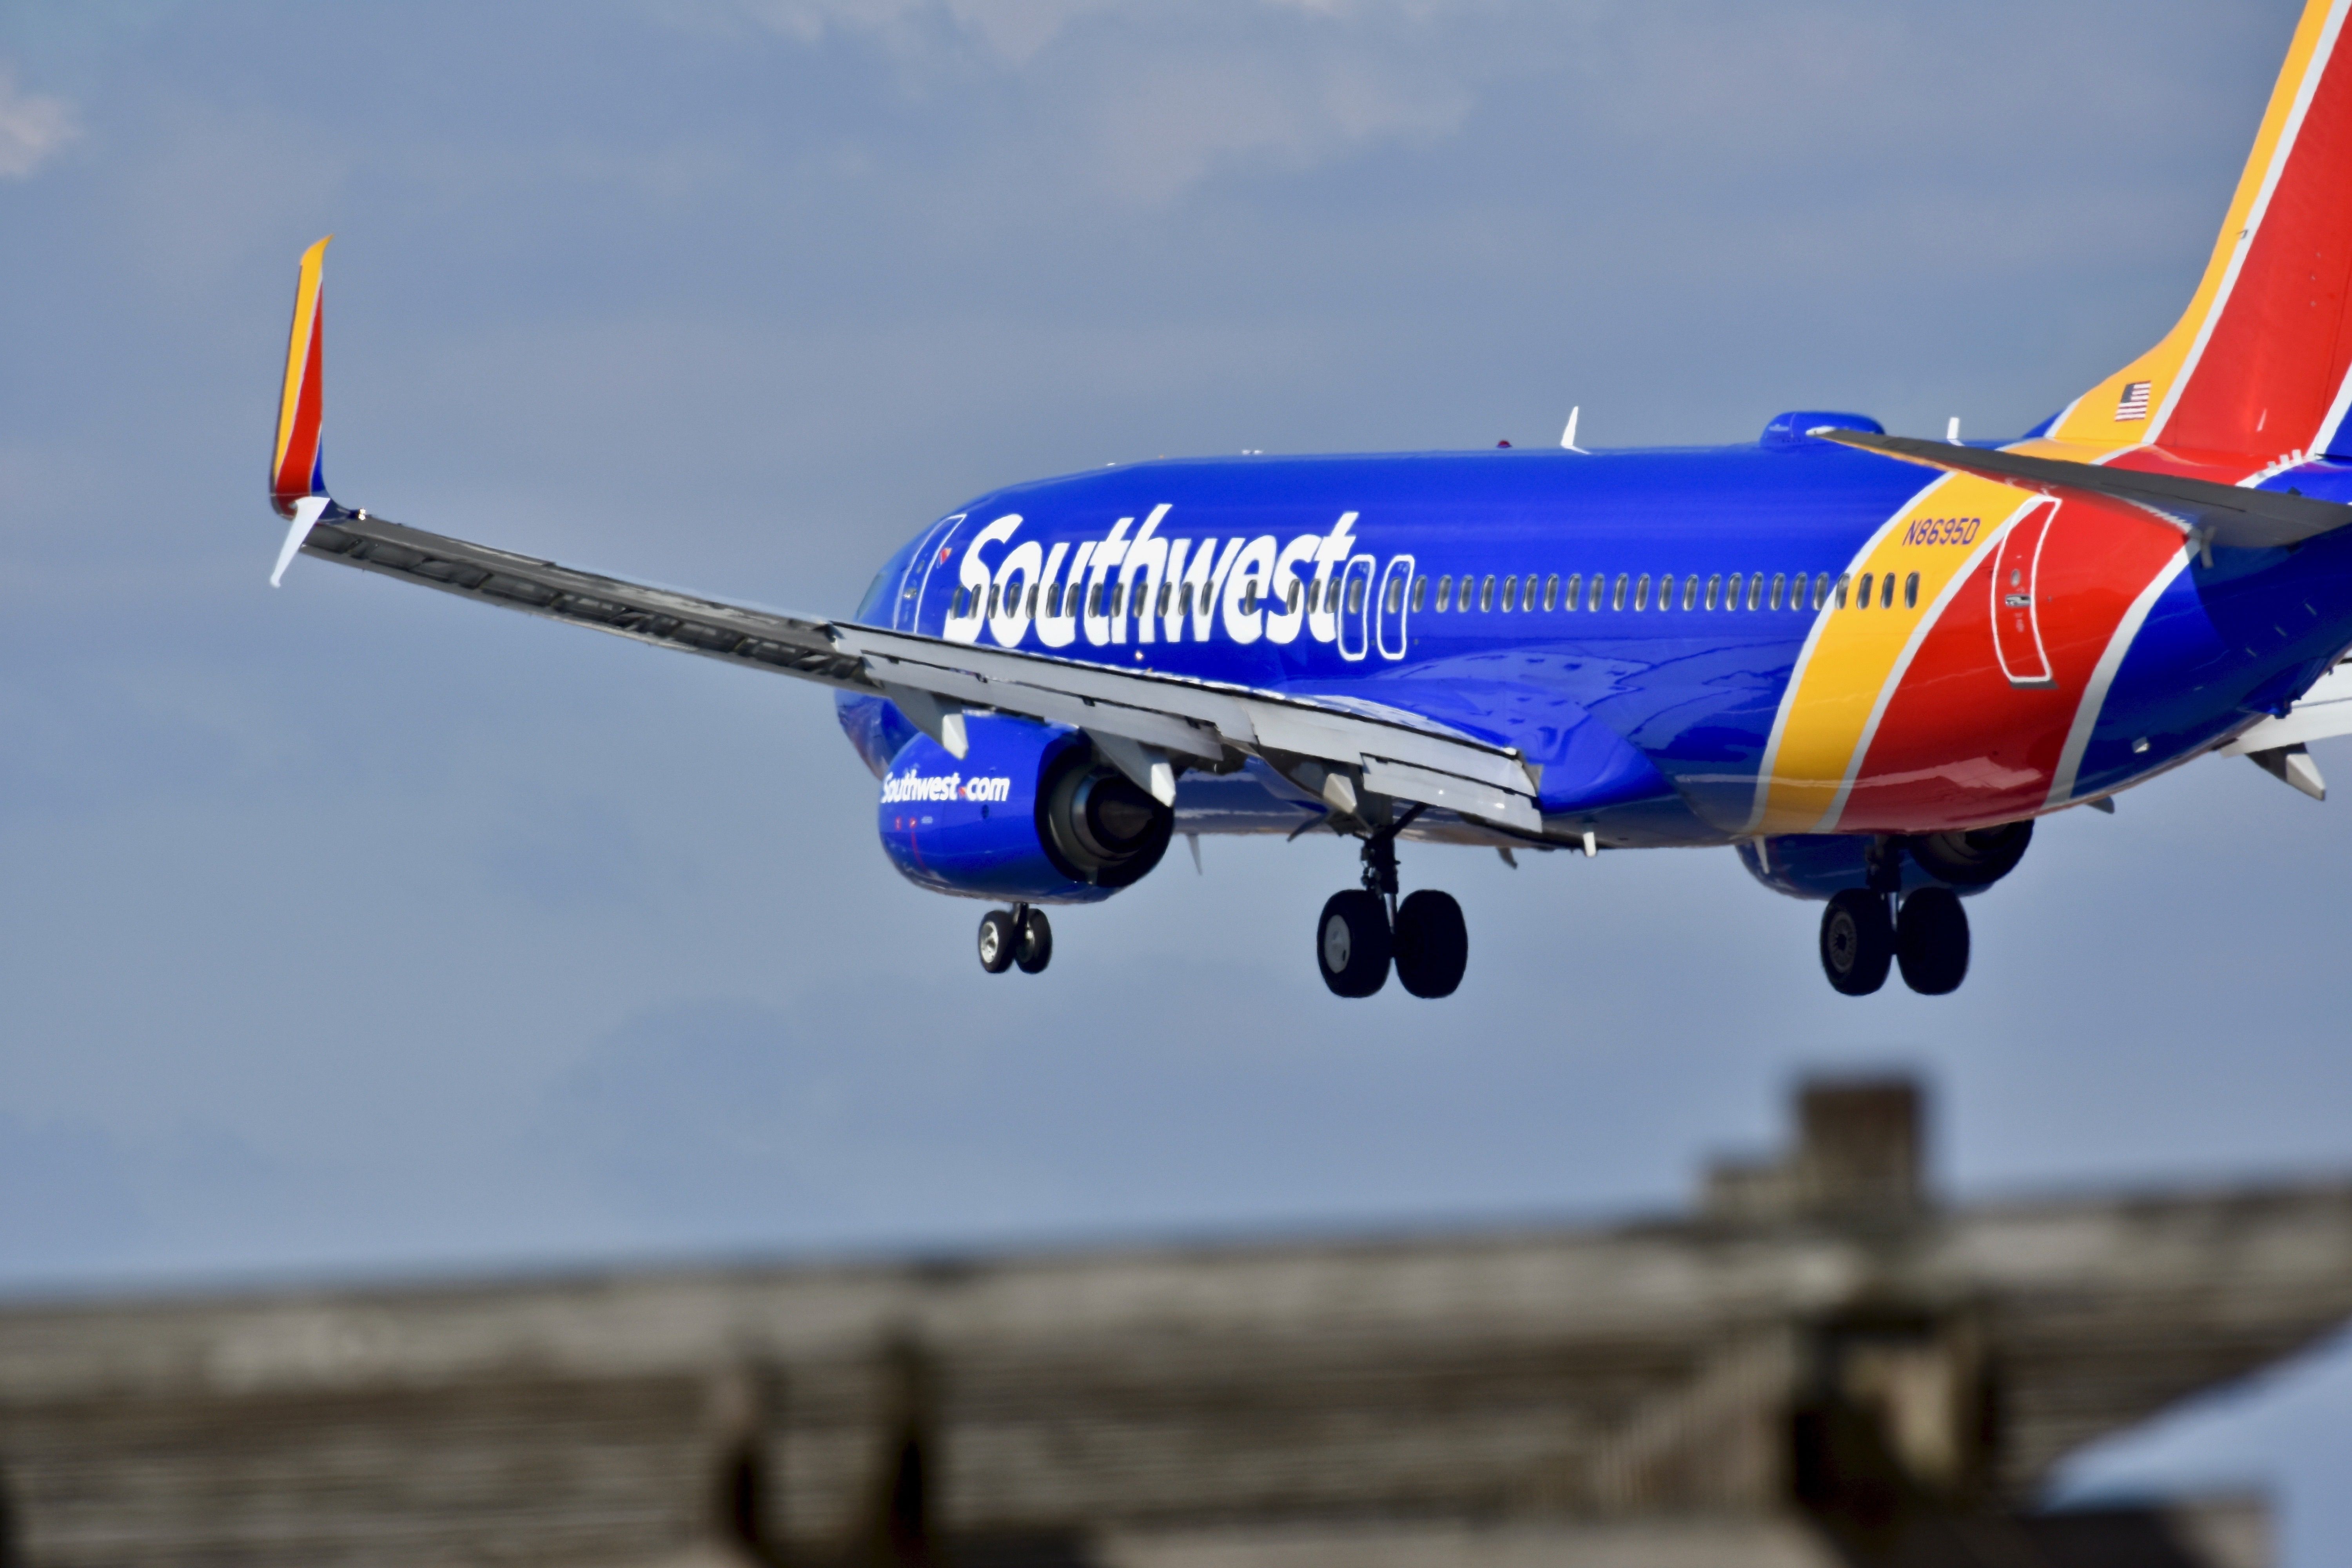 Southwest Airlines Boeing 737 taking off from Baltimore Washington Airport